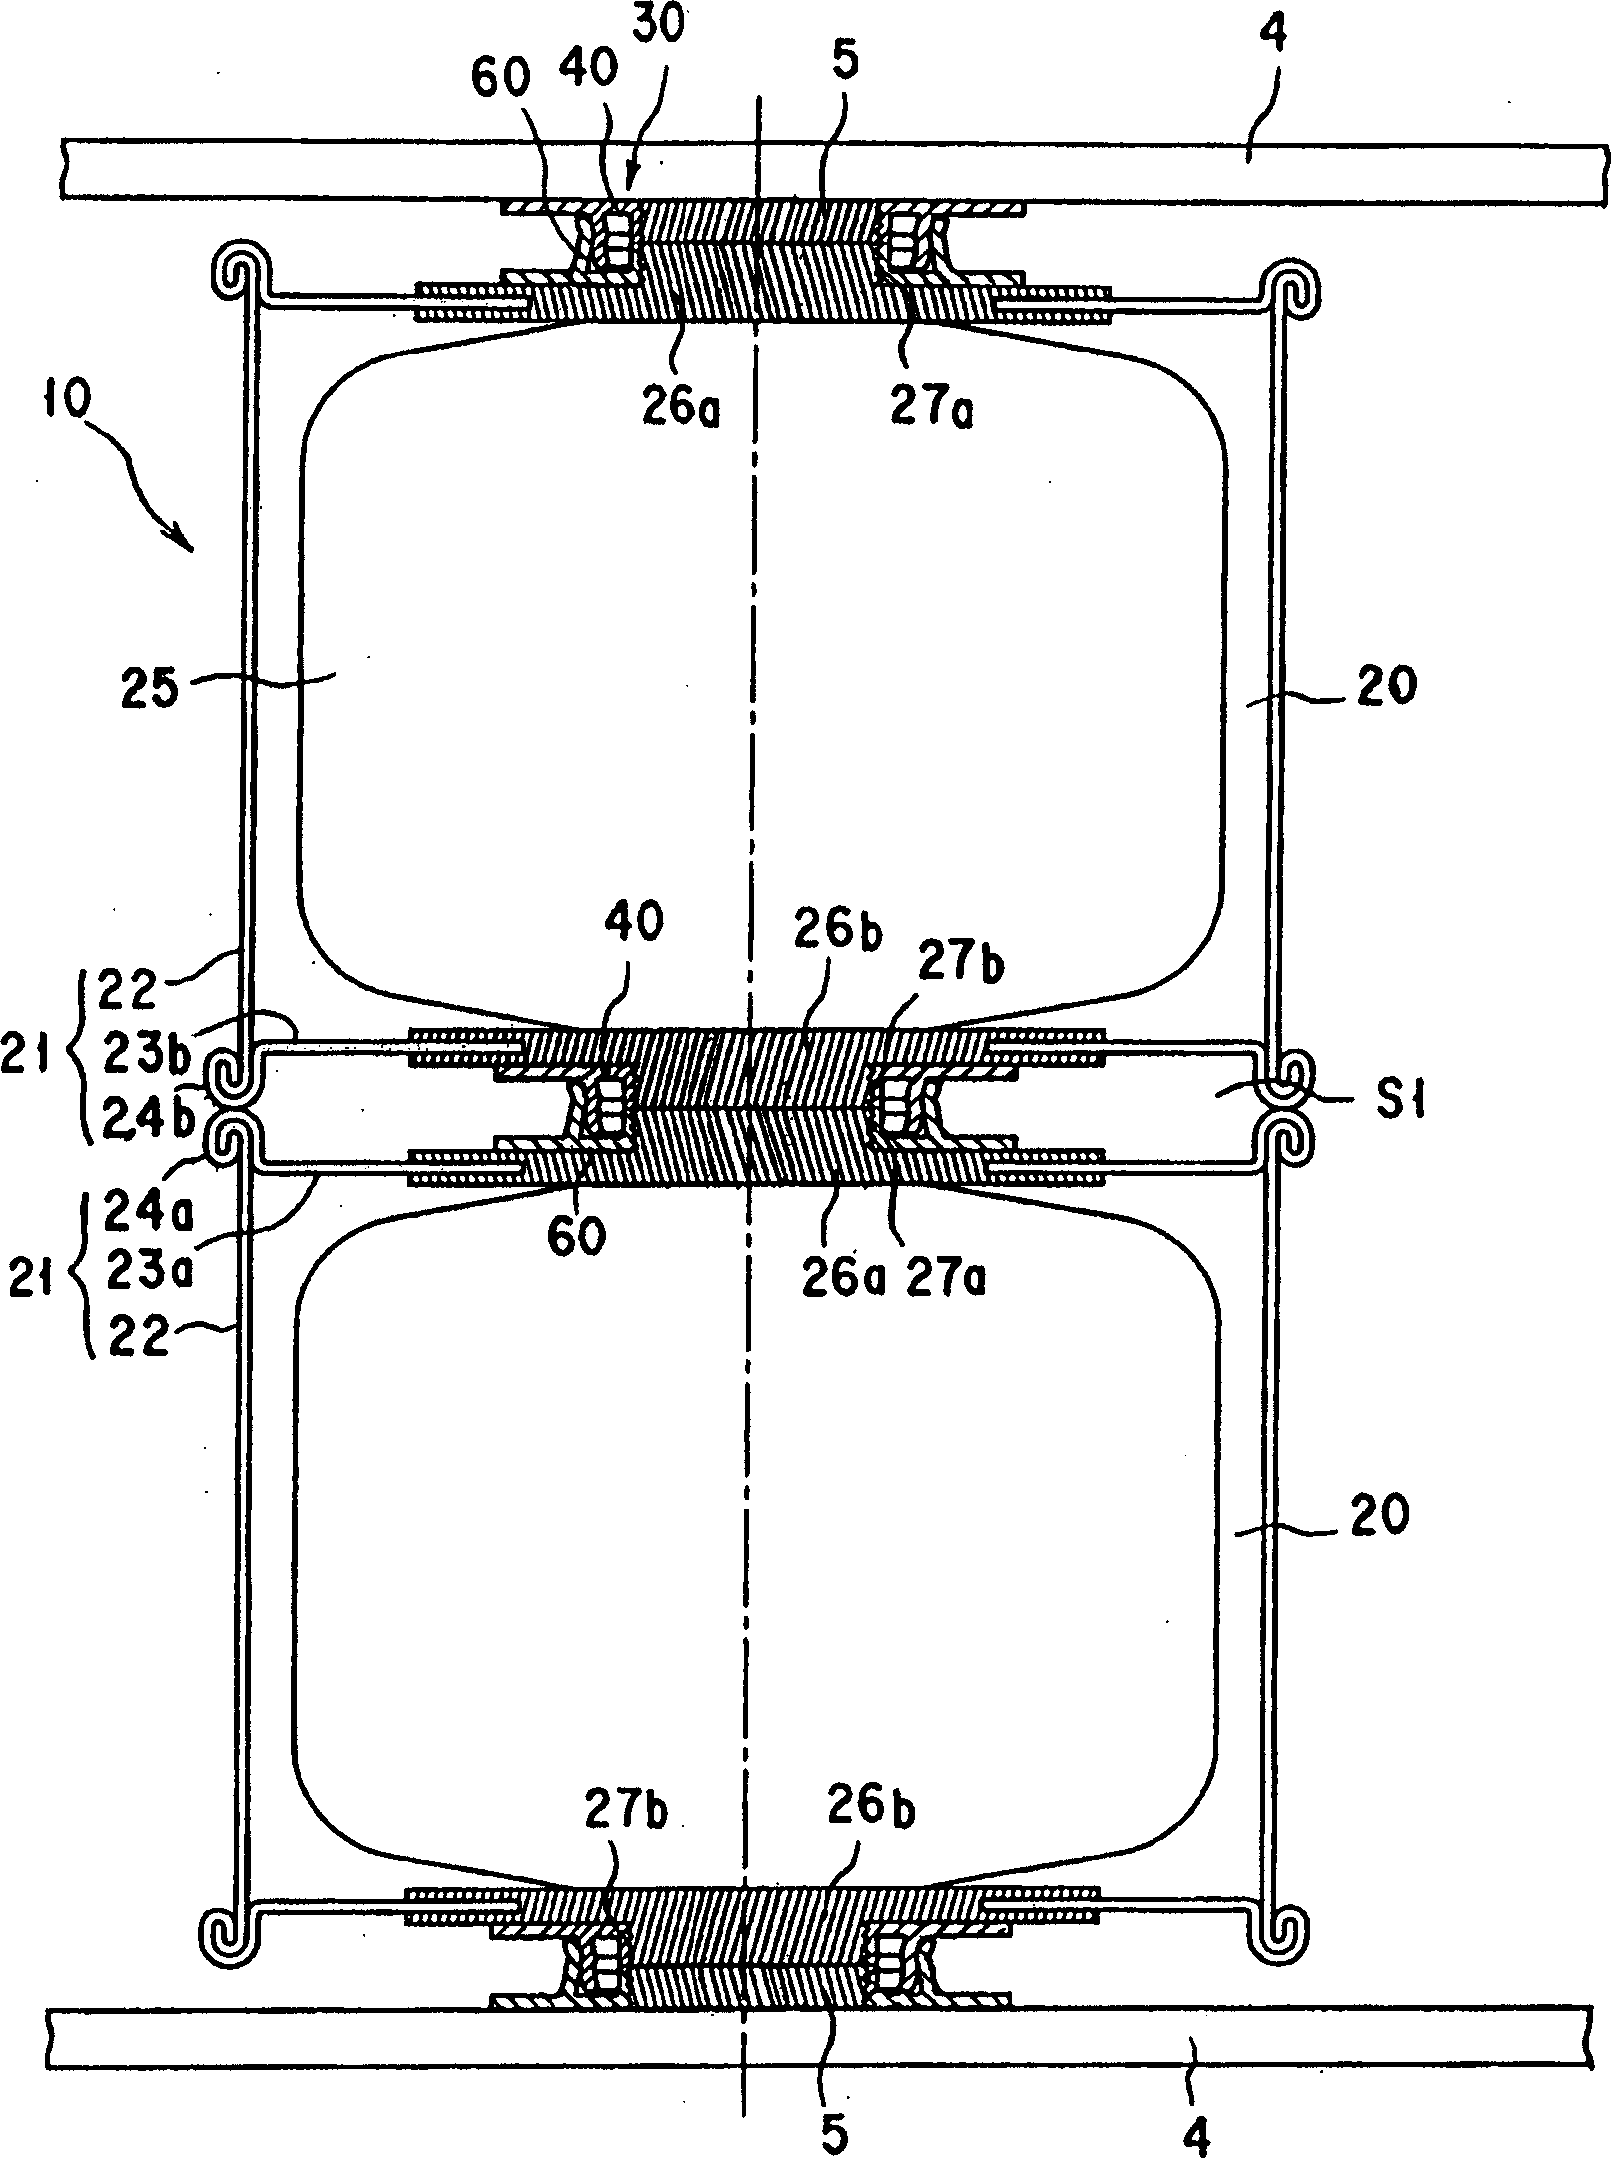 Electric connector, unit for covering its connected part between two terminals, storage cell and bus bar equipped with them